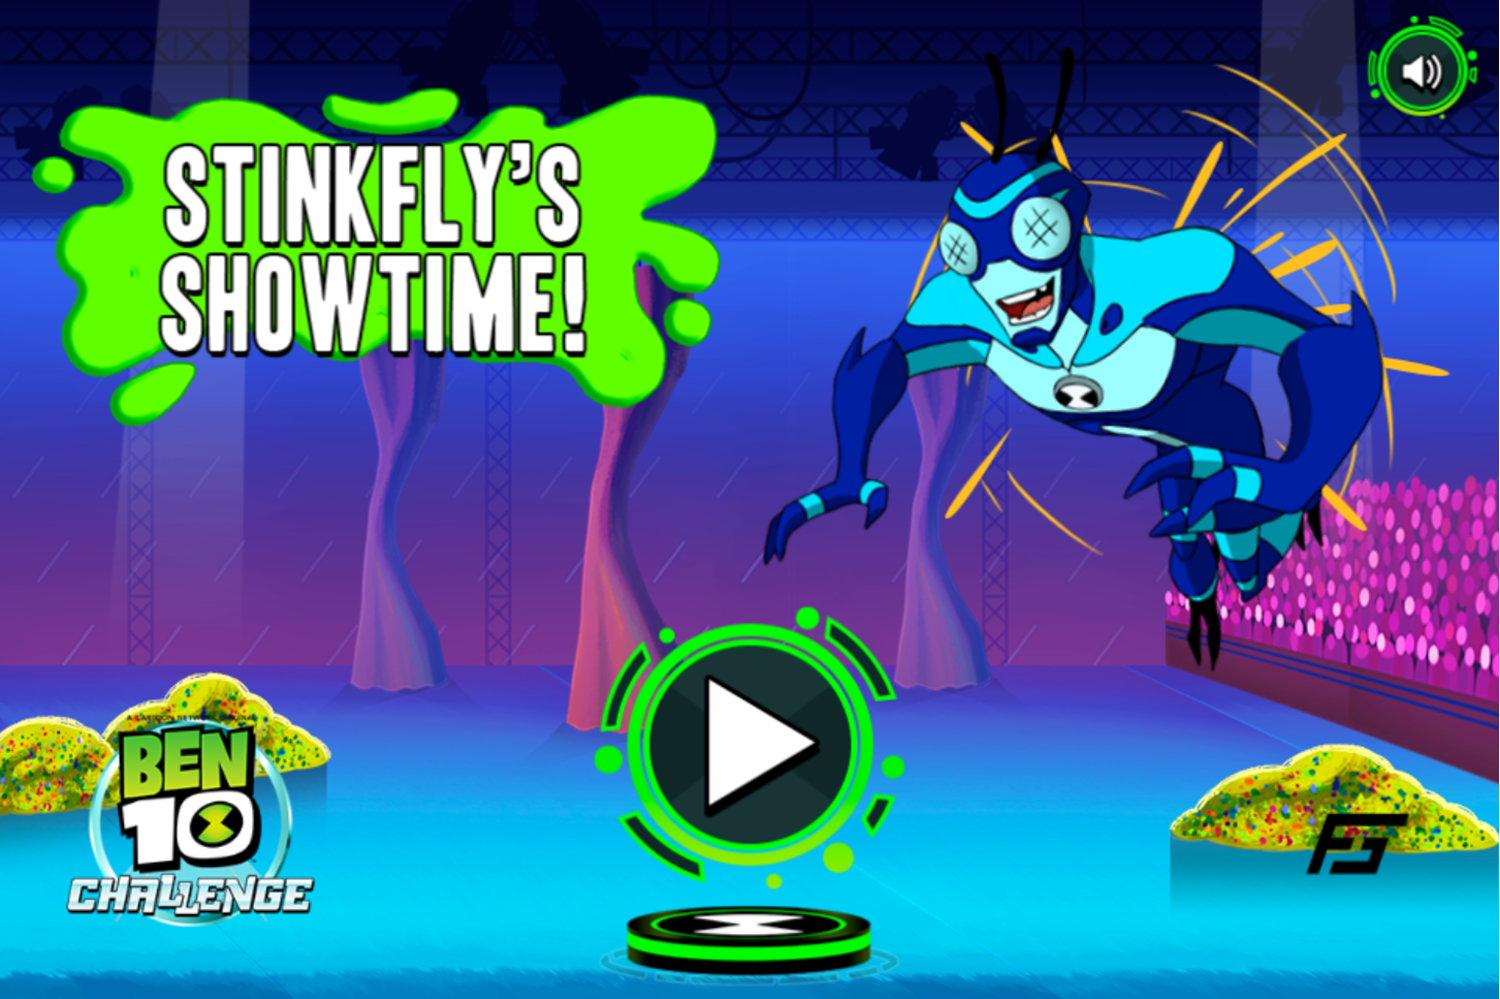 Ben 10 Challenge Stinkfly's Showtime Game Welcome Screen Screenshot.